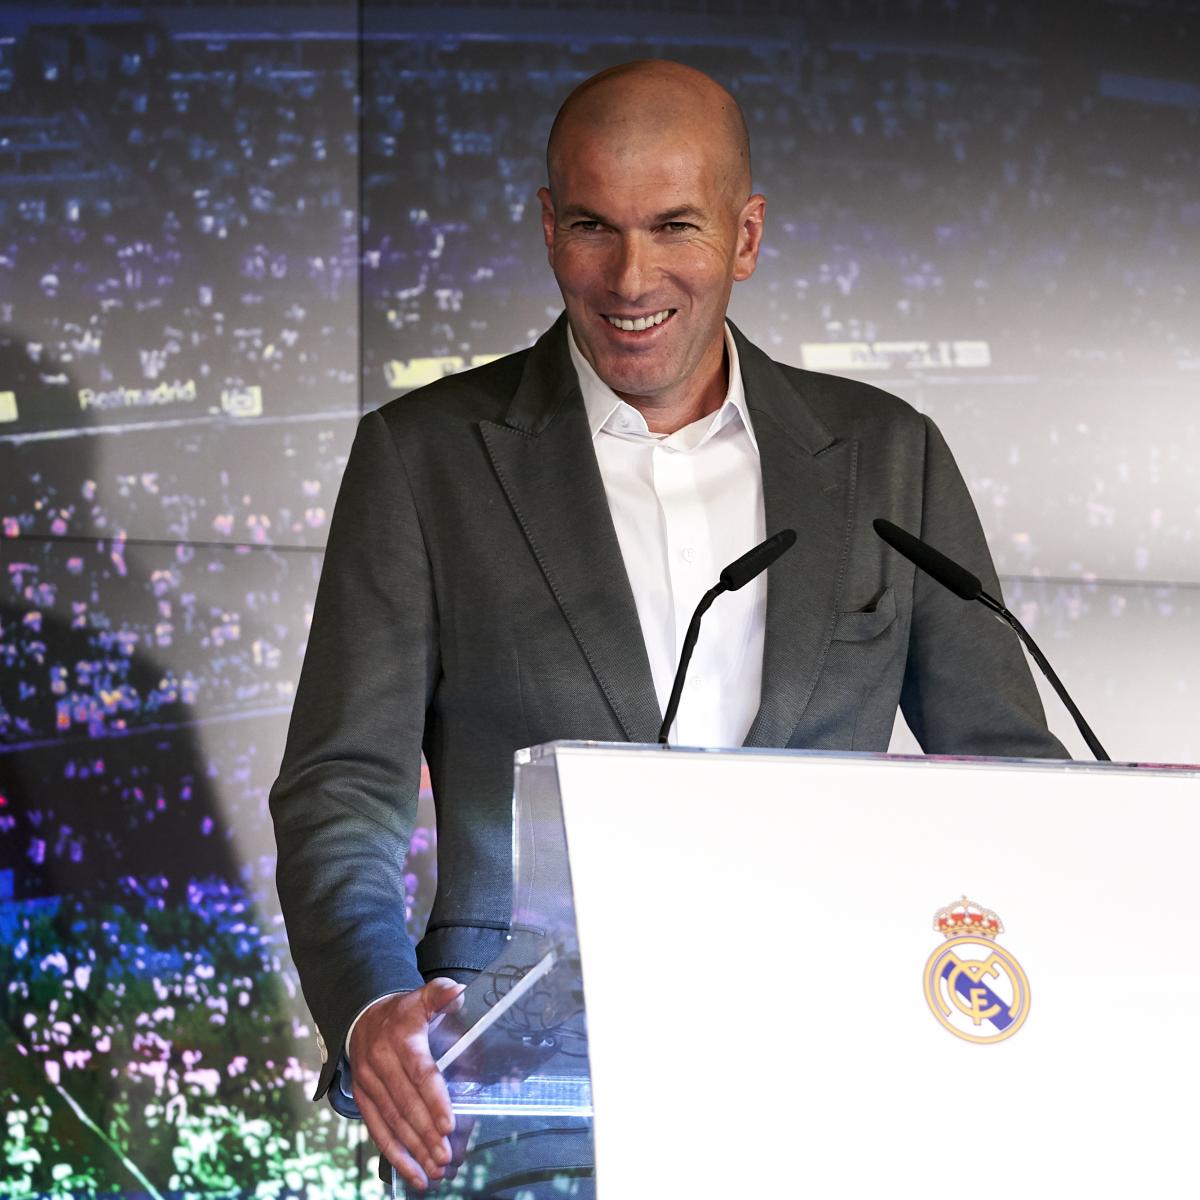 Solari: Zidane is a breath of fresh air. The team have responded